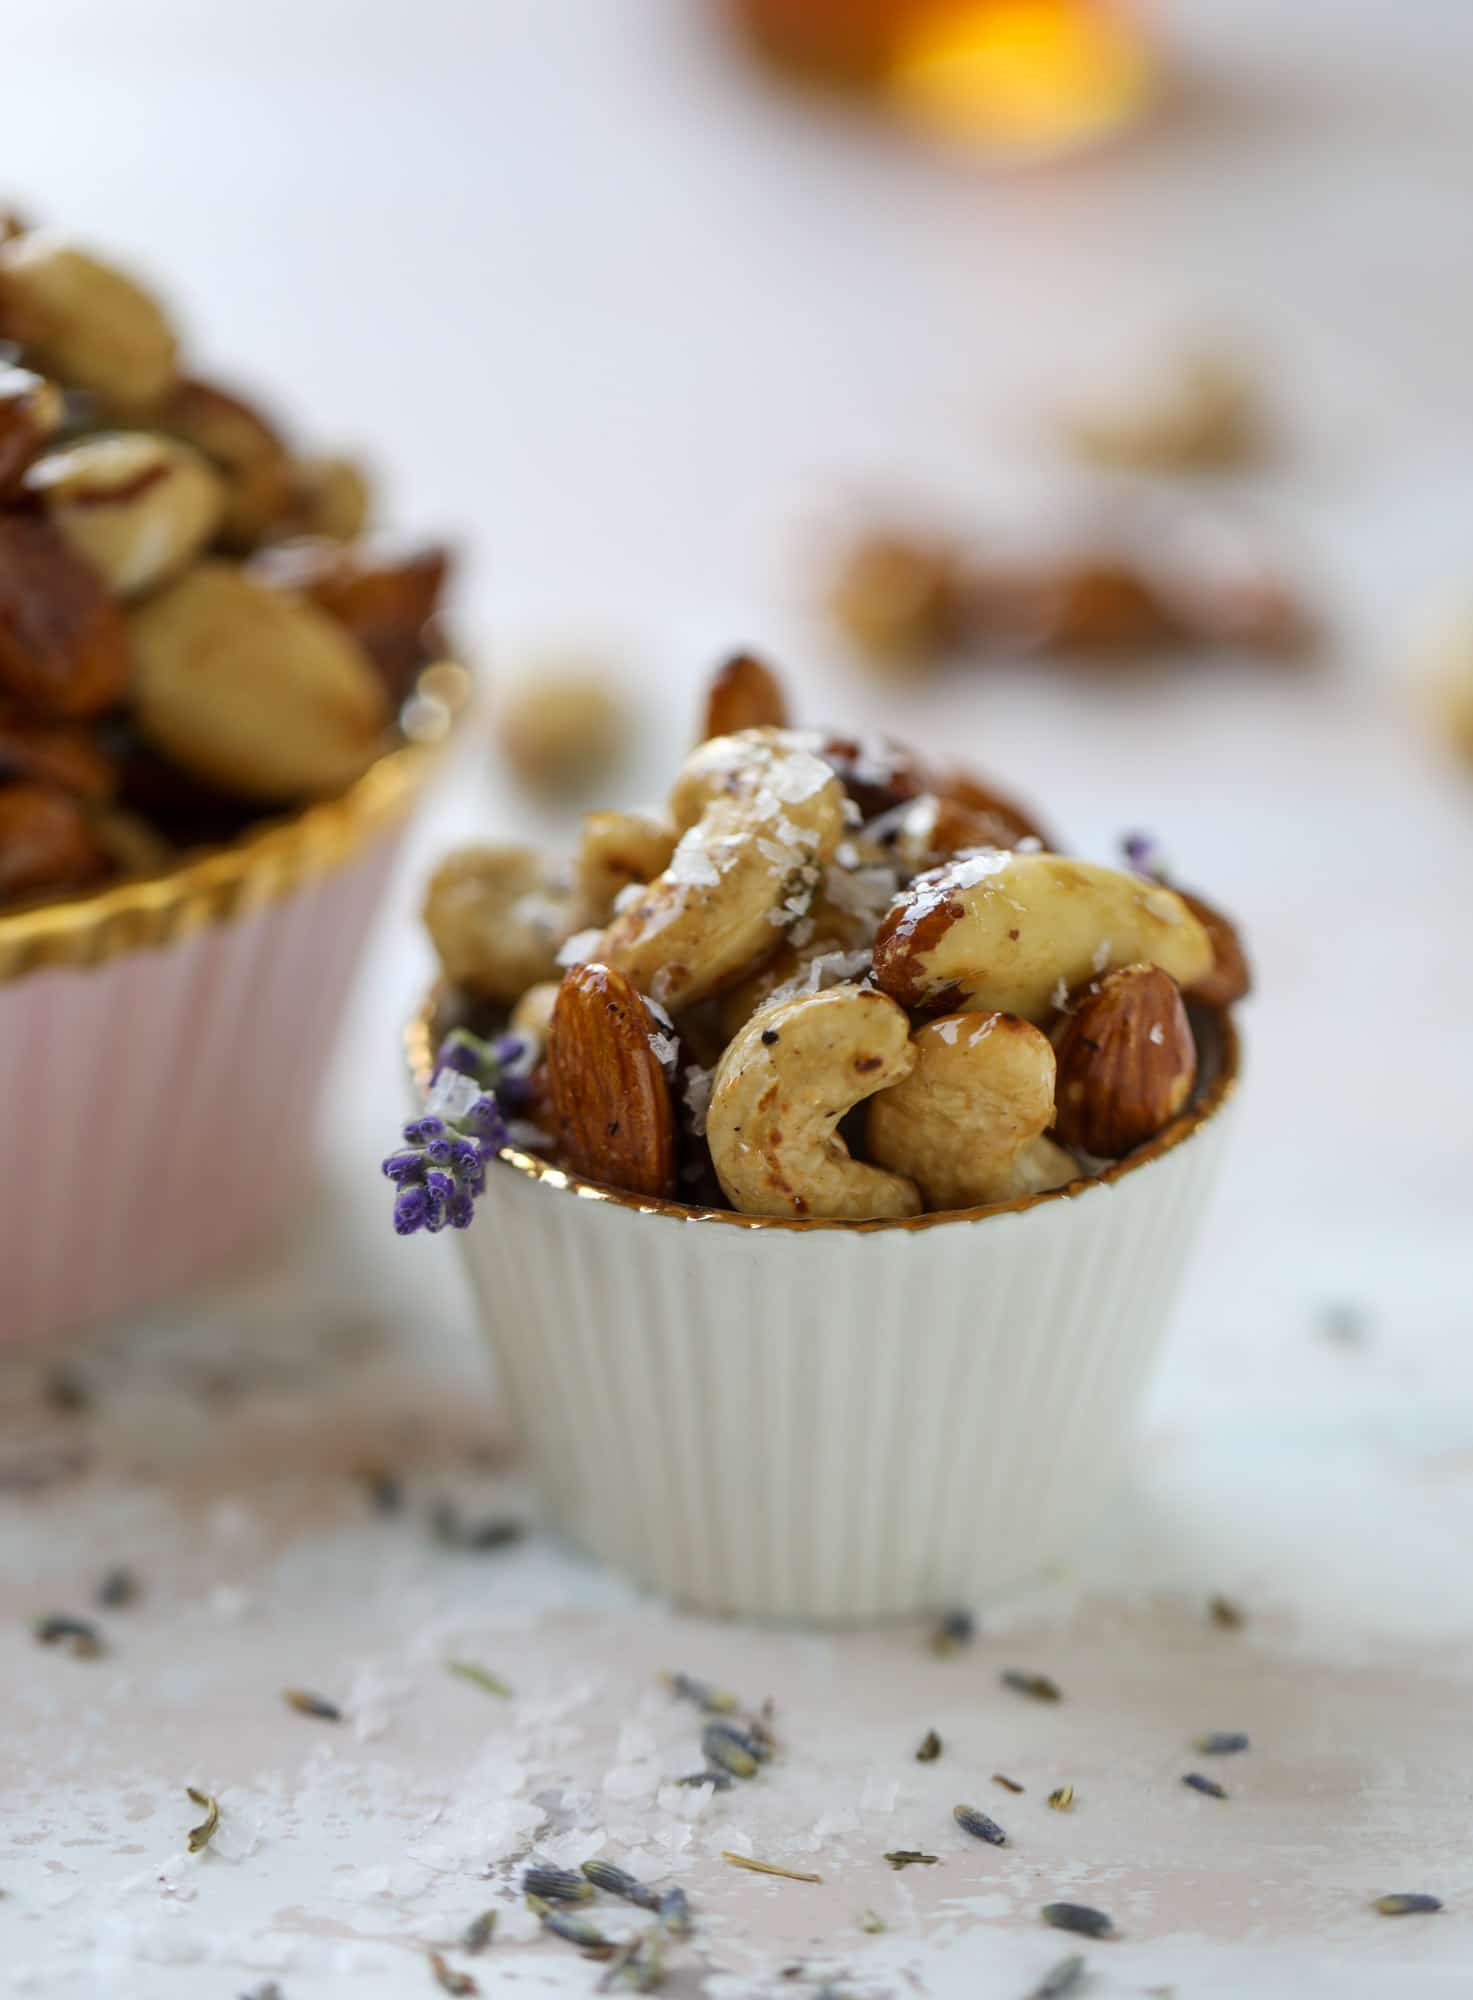 These salted honey lavender nuts are the best snack to make for when you're on the go or when you need a perfect appetizer for your dinner party. Roasted, sweet and salty with a hint of lavender makes these irresistible! I howsweeteats.com #honey #lavender #nuts #salted #almonds #cashews #snacks #appetizers